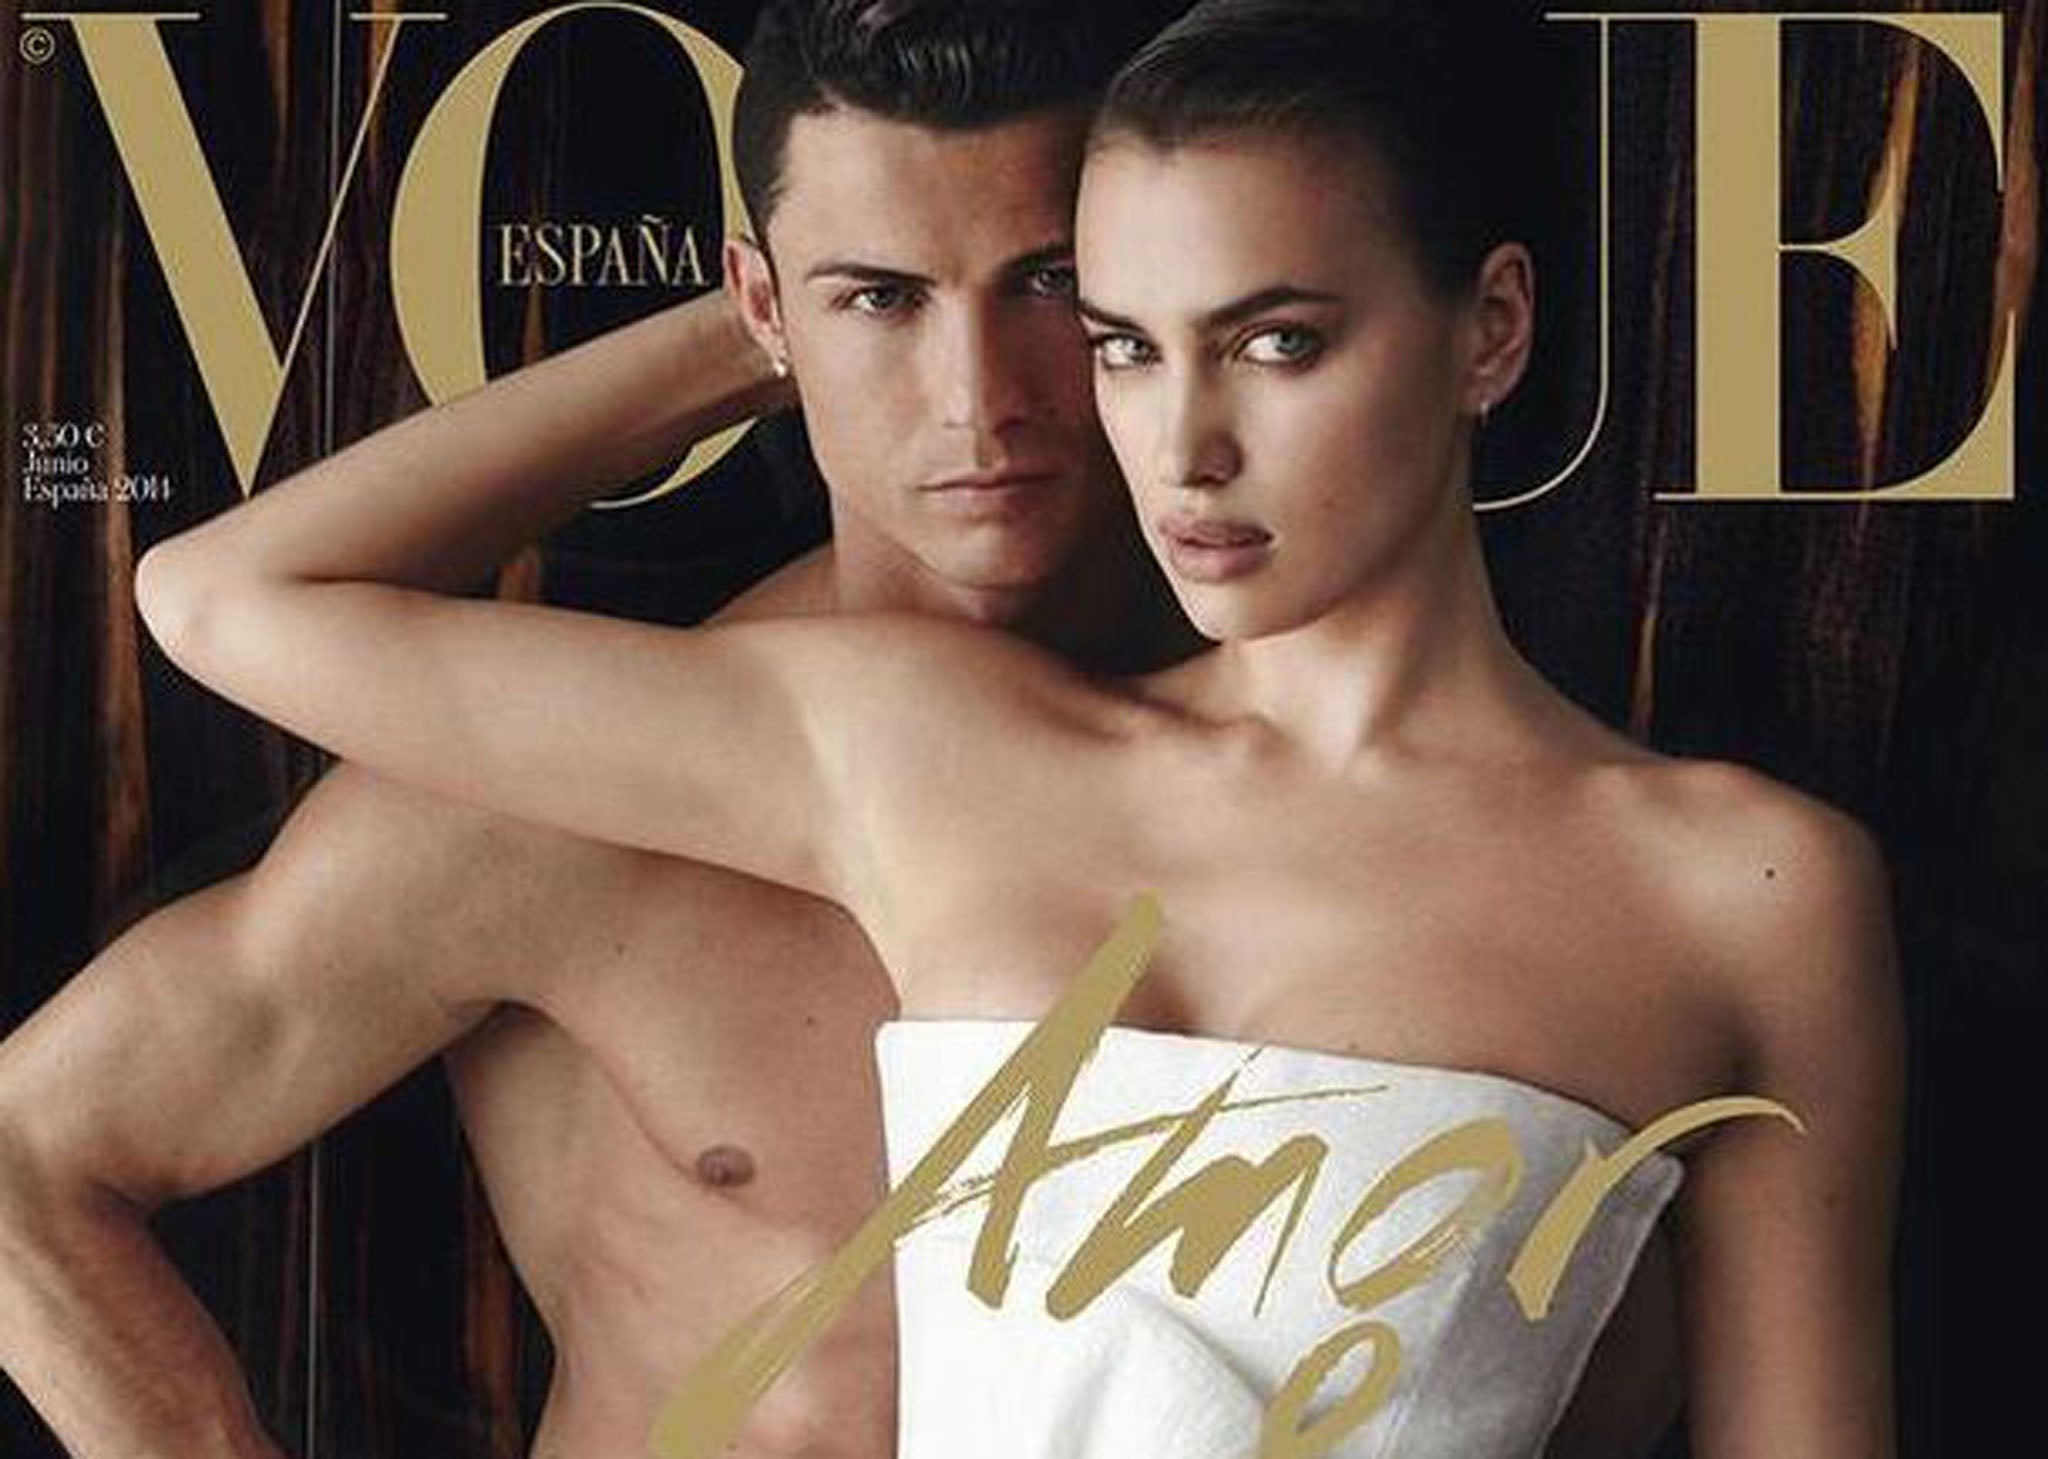 Cristiano Ronaldo naked on the cover of Vogue Real Madrid star strikes pose that would make Zoolander deeply envious The Independent The Independent